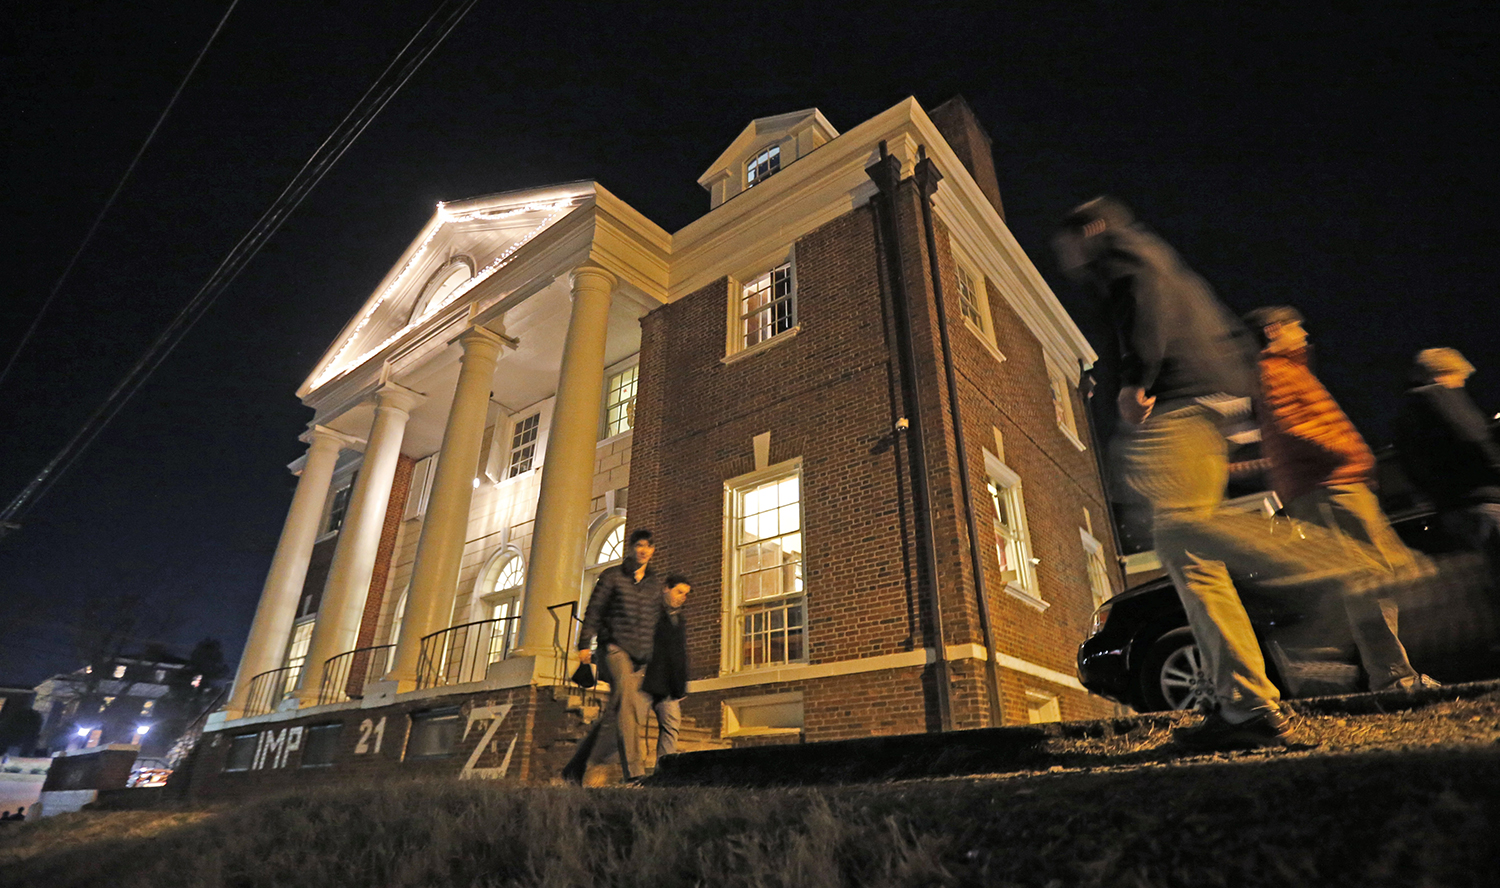 For the University of Virginia fraternity, evidence presented in Nicole Eramo's trial revealed that Sabrina Rubin Erdely began writing her article with a severe bias against fraternities. (AP Photo)